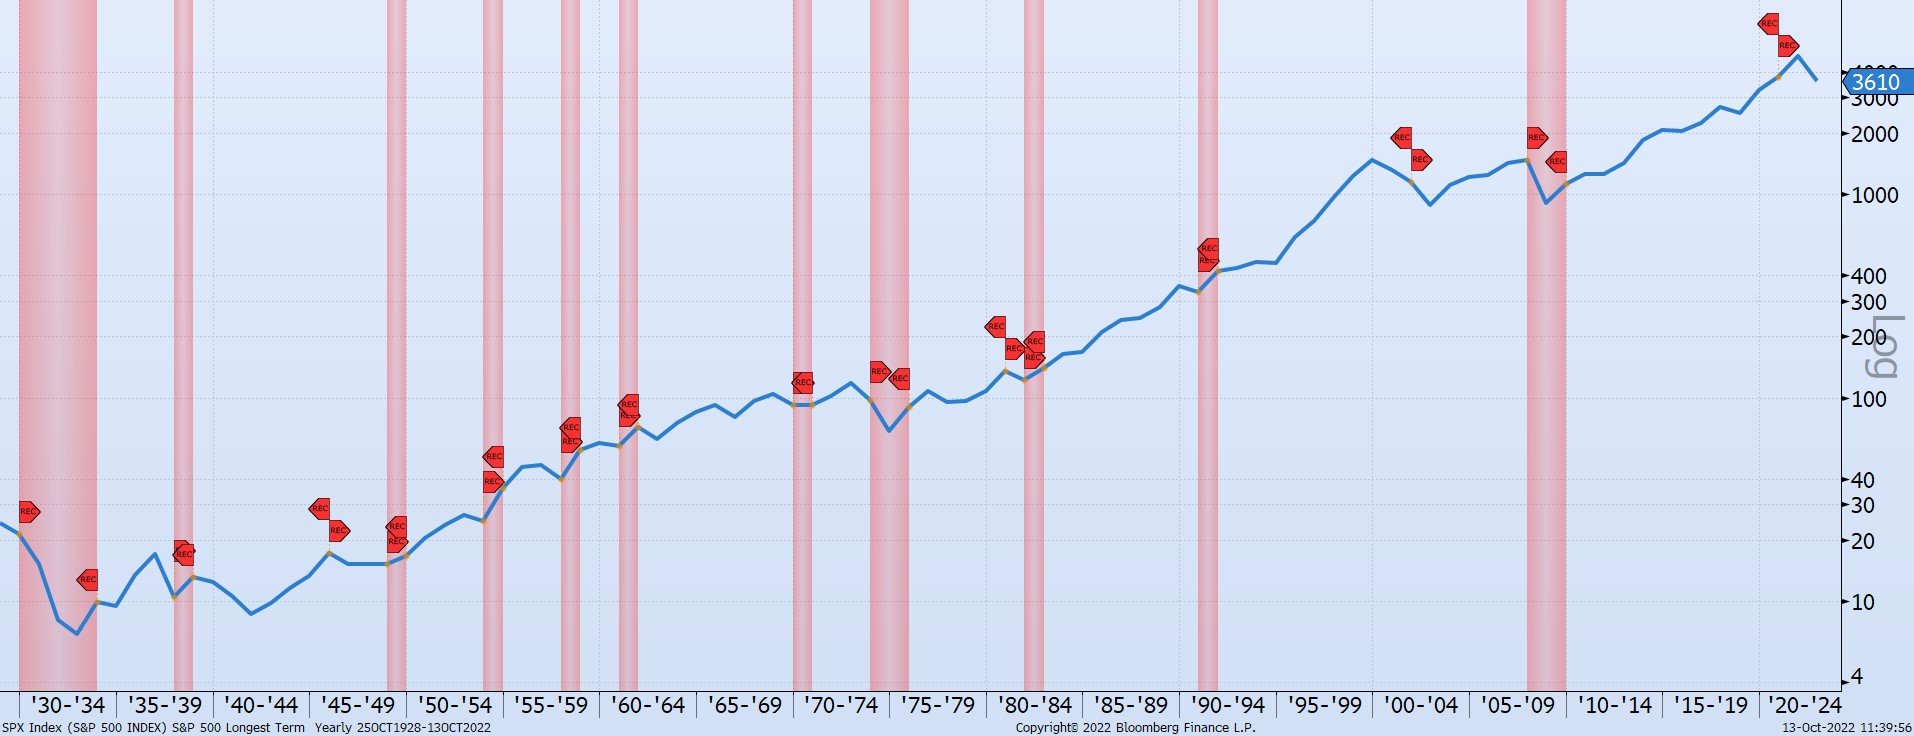 chart shows the S&P 500 index with recessions marked in red going all the way back to 1928